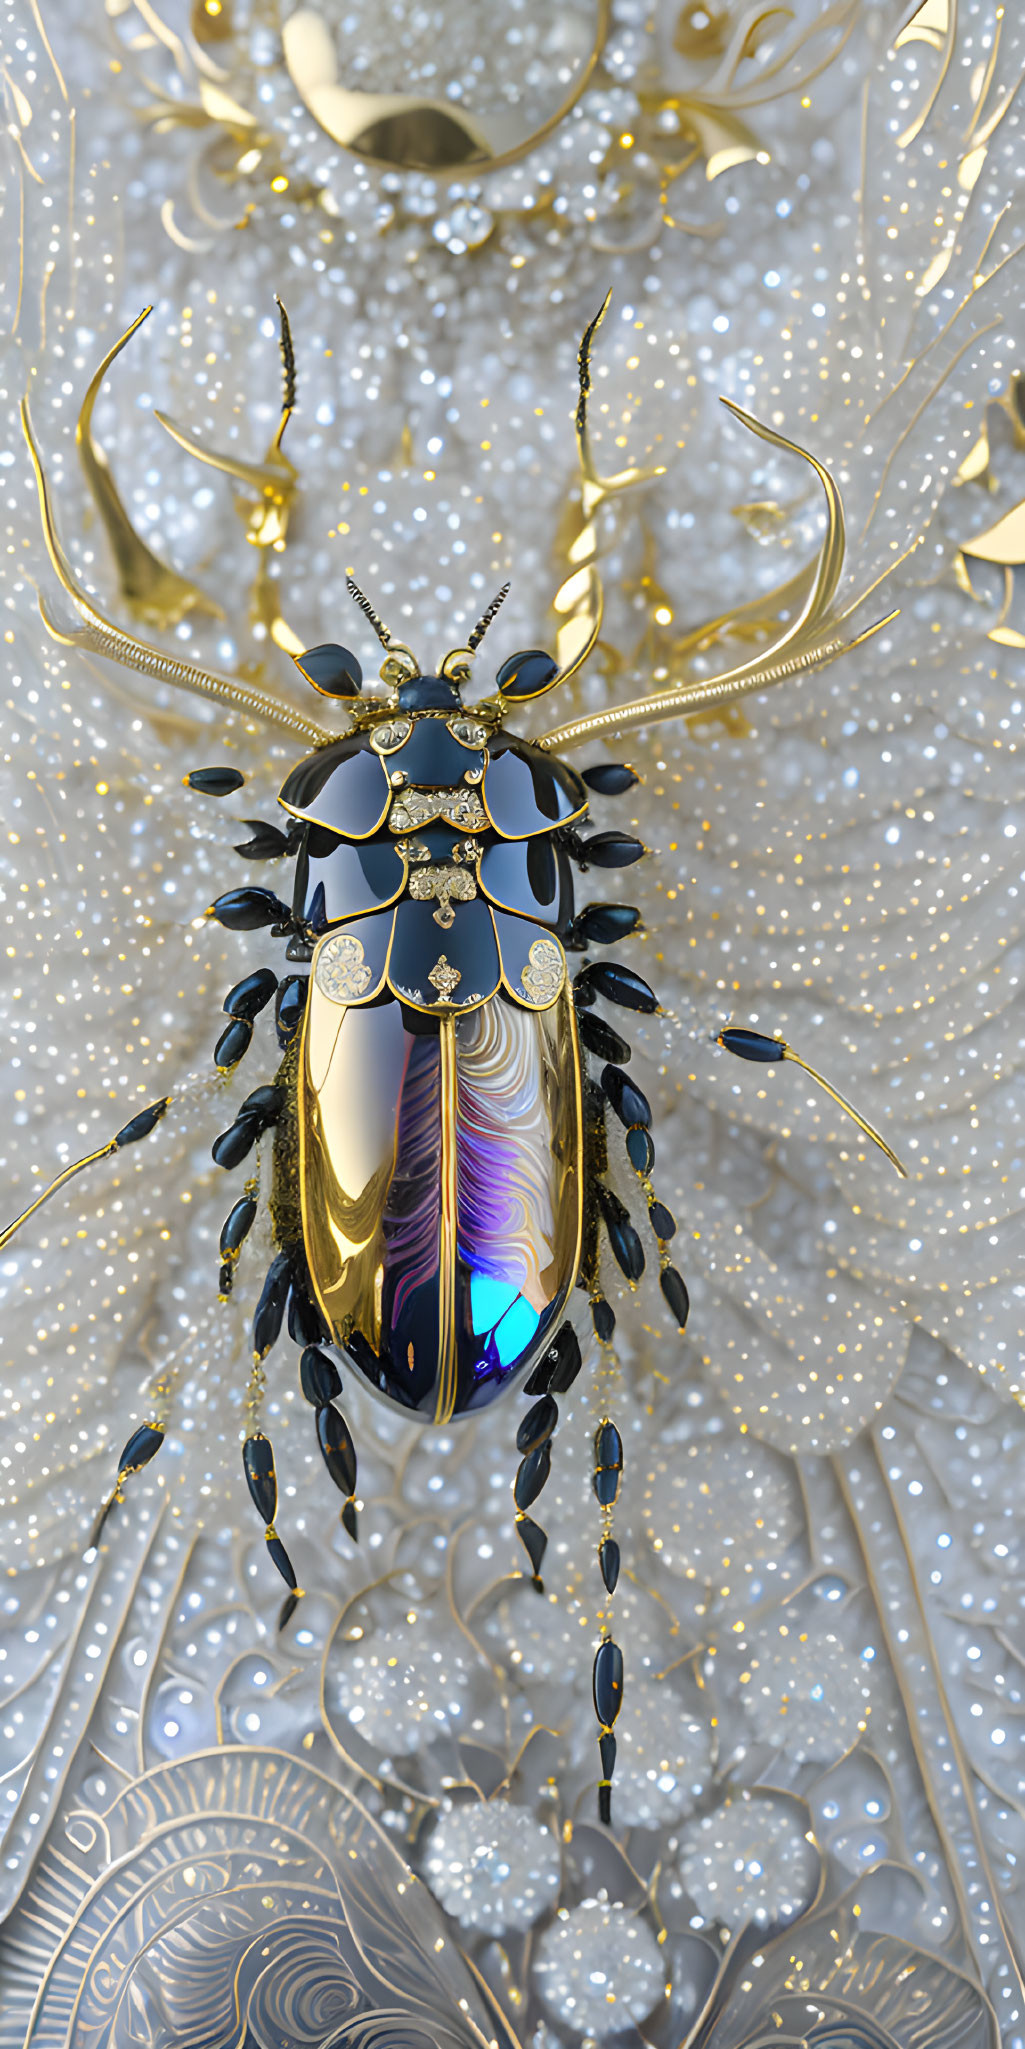 Luxurious gold and iridescent beetle on ornate golden background